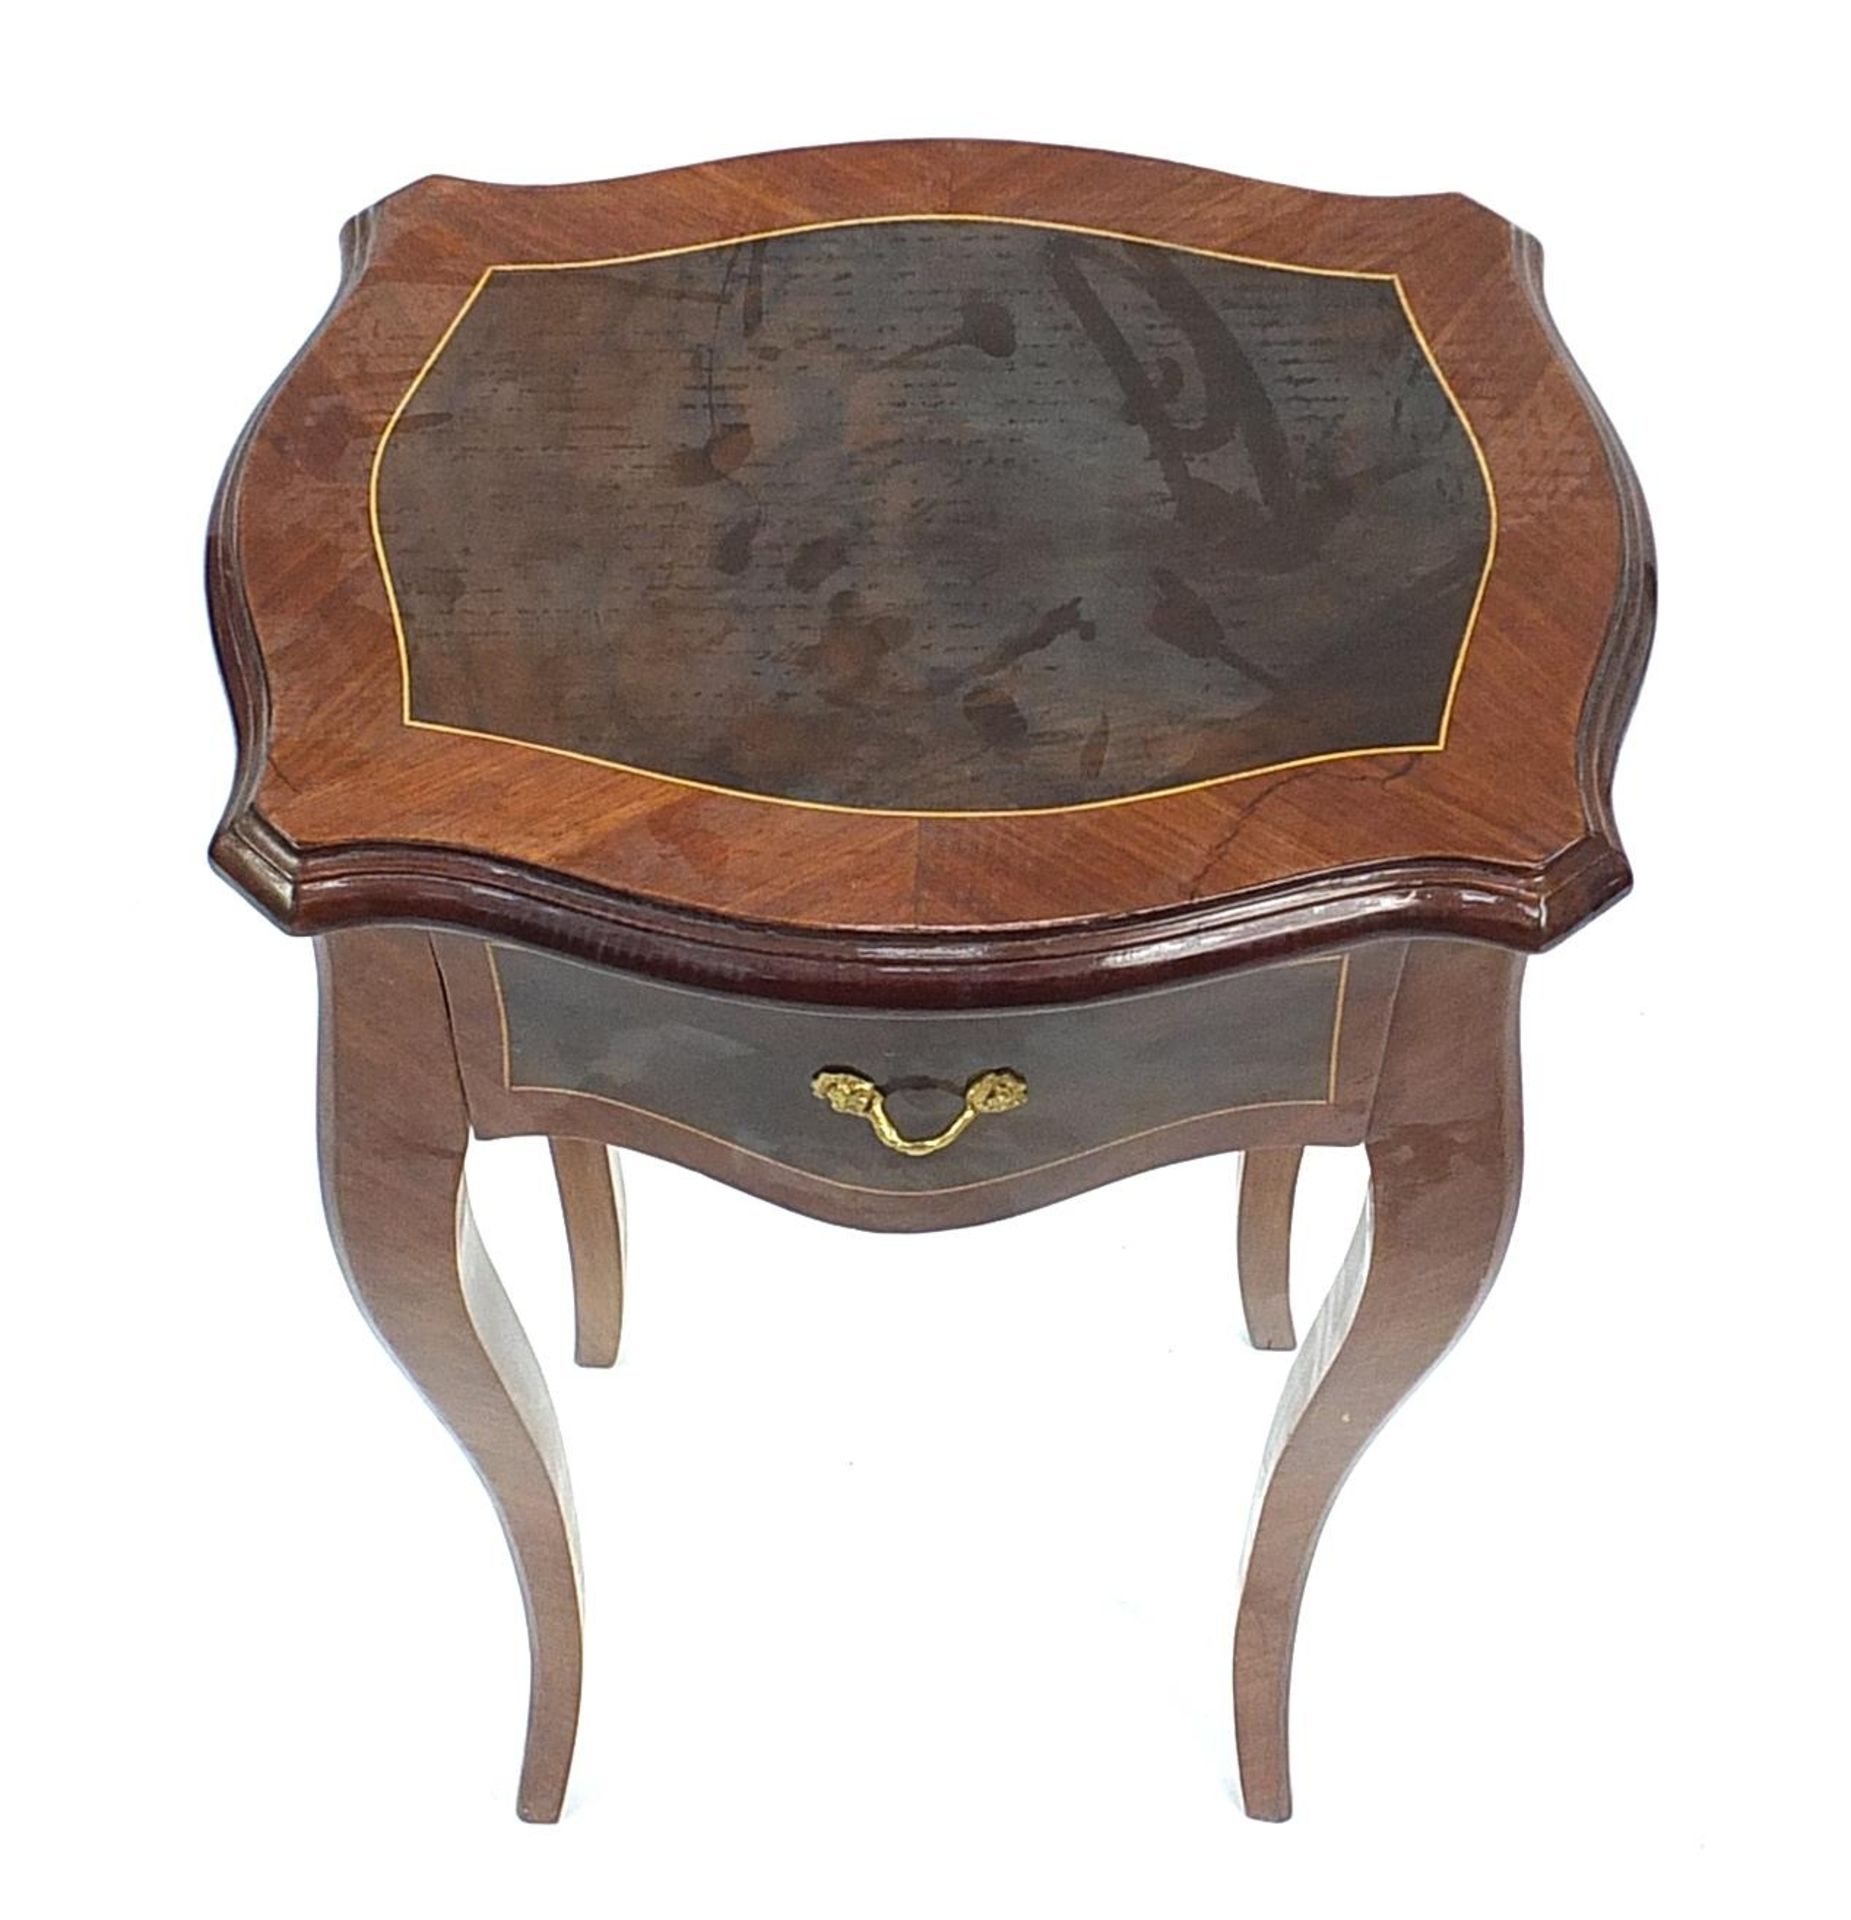 French style side table with serpentine outline and frieze drawer, 78cm H x 44cm W x 34cm D - Image 3 of 4